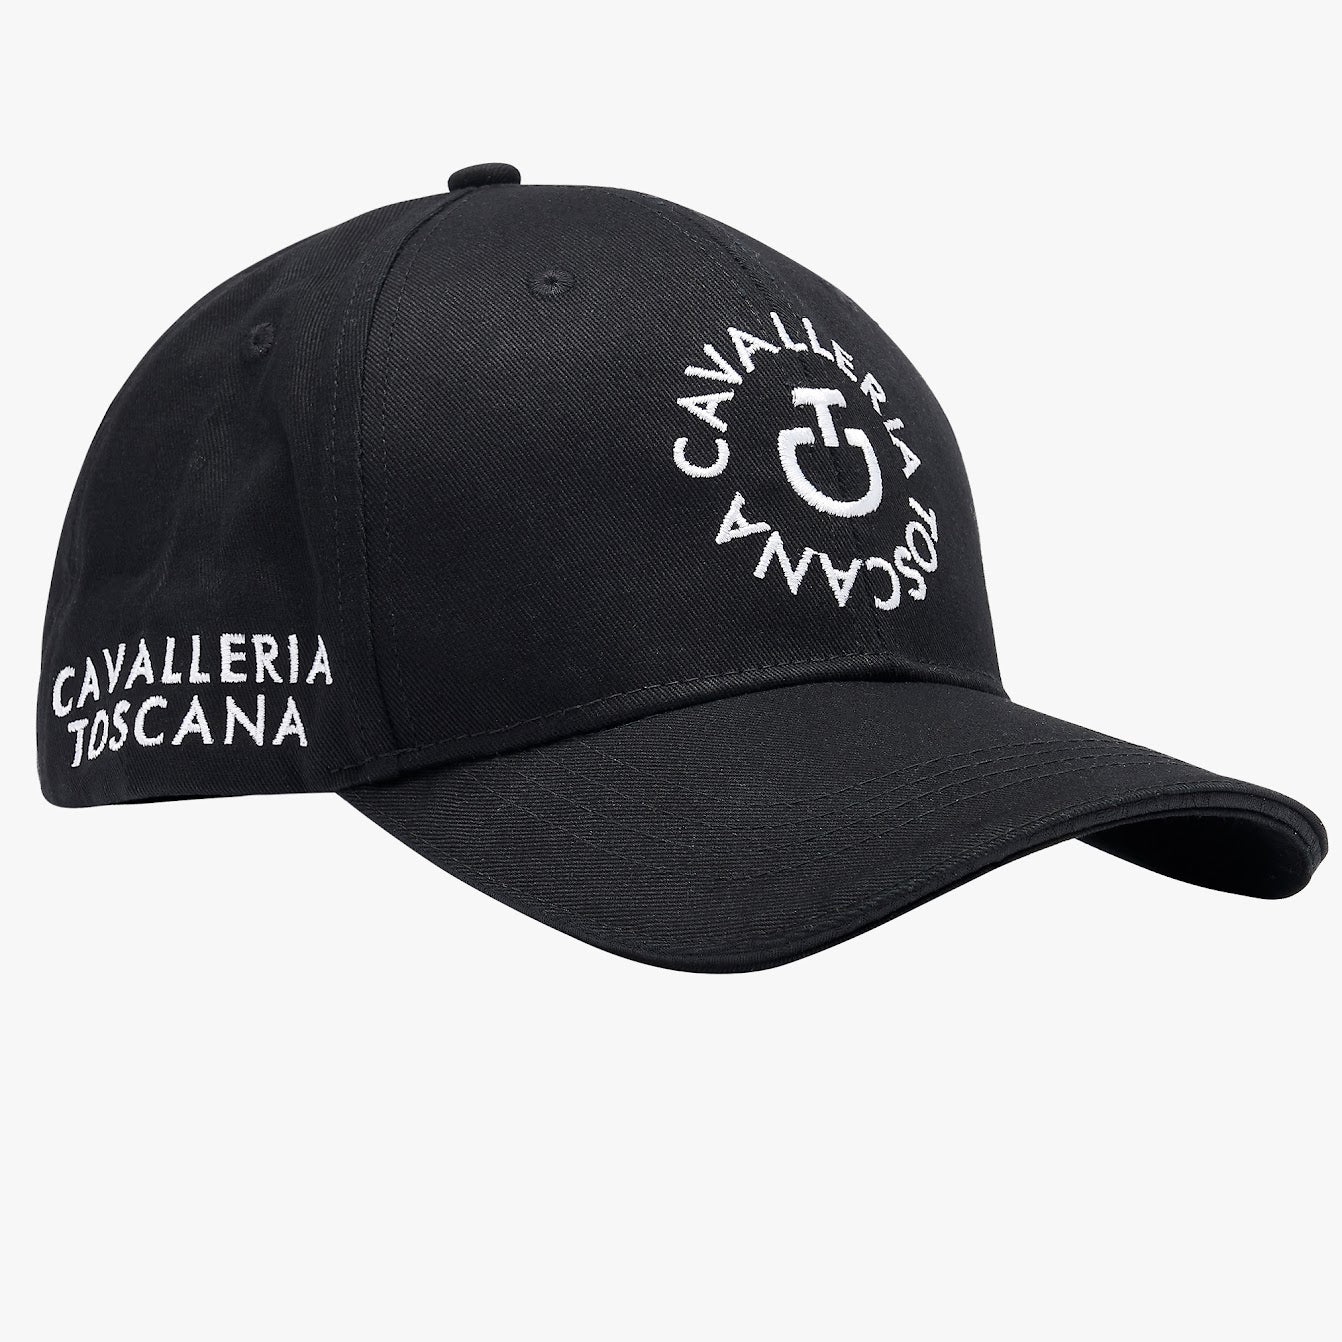 The Cavalleria Toscana Orbit cap is the perfect accessory to finish your look. 